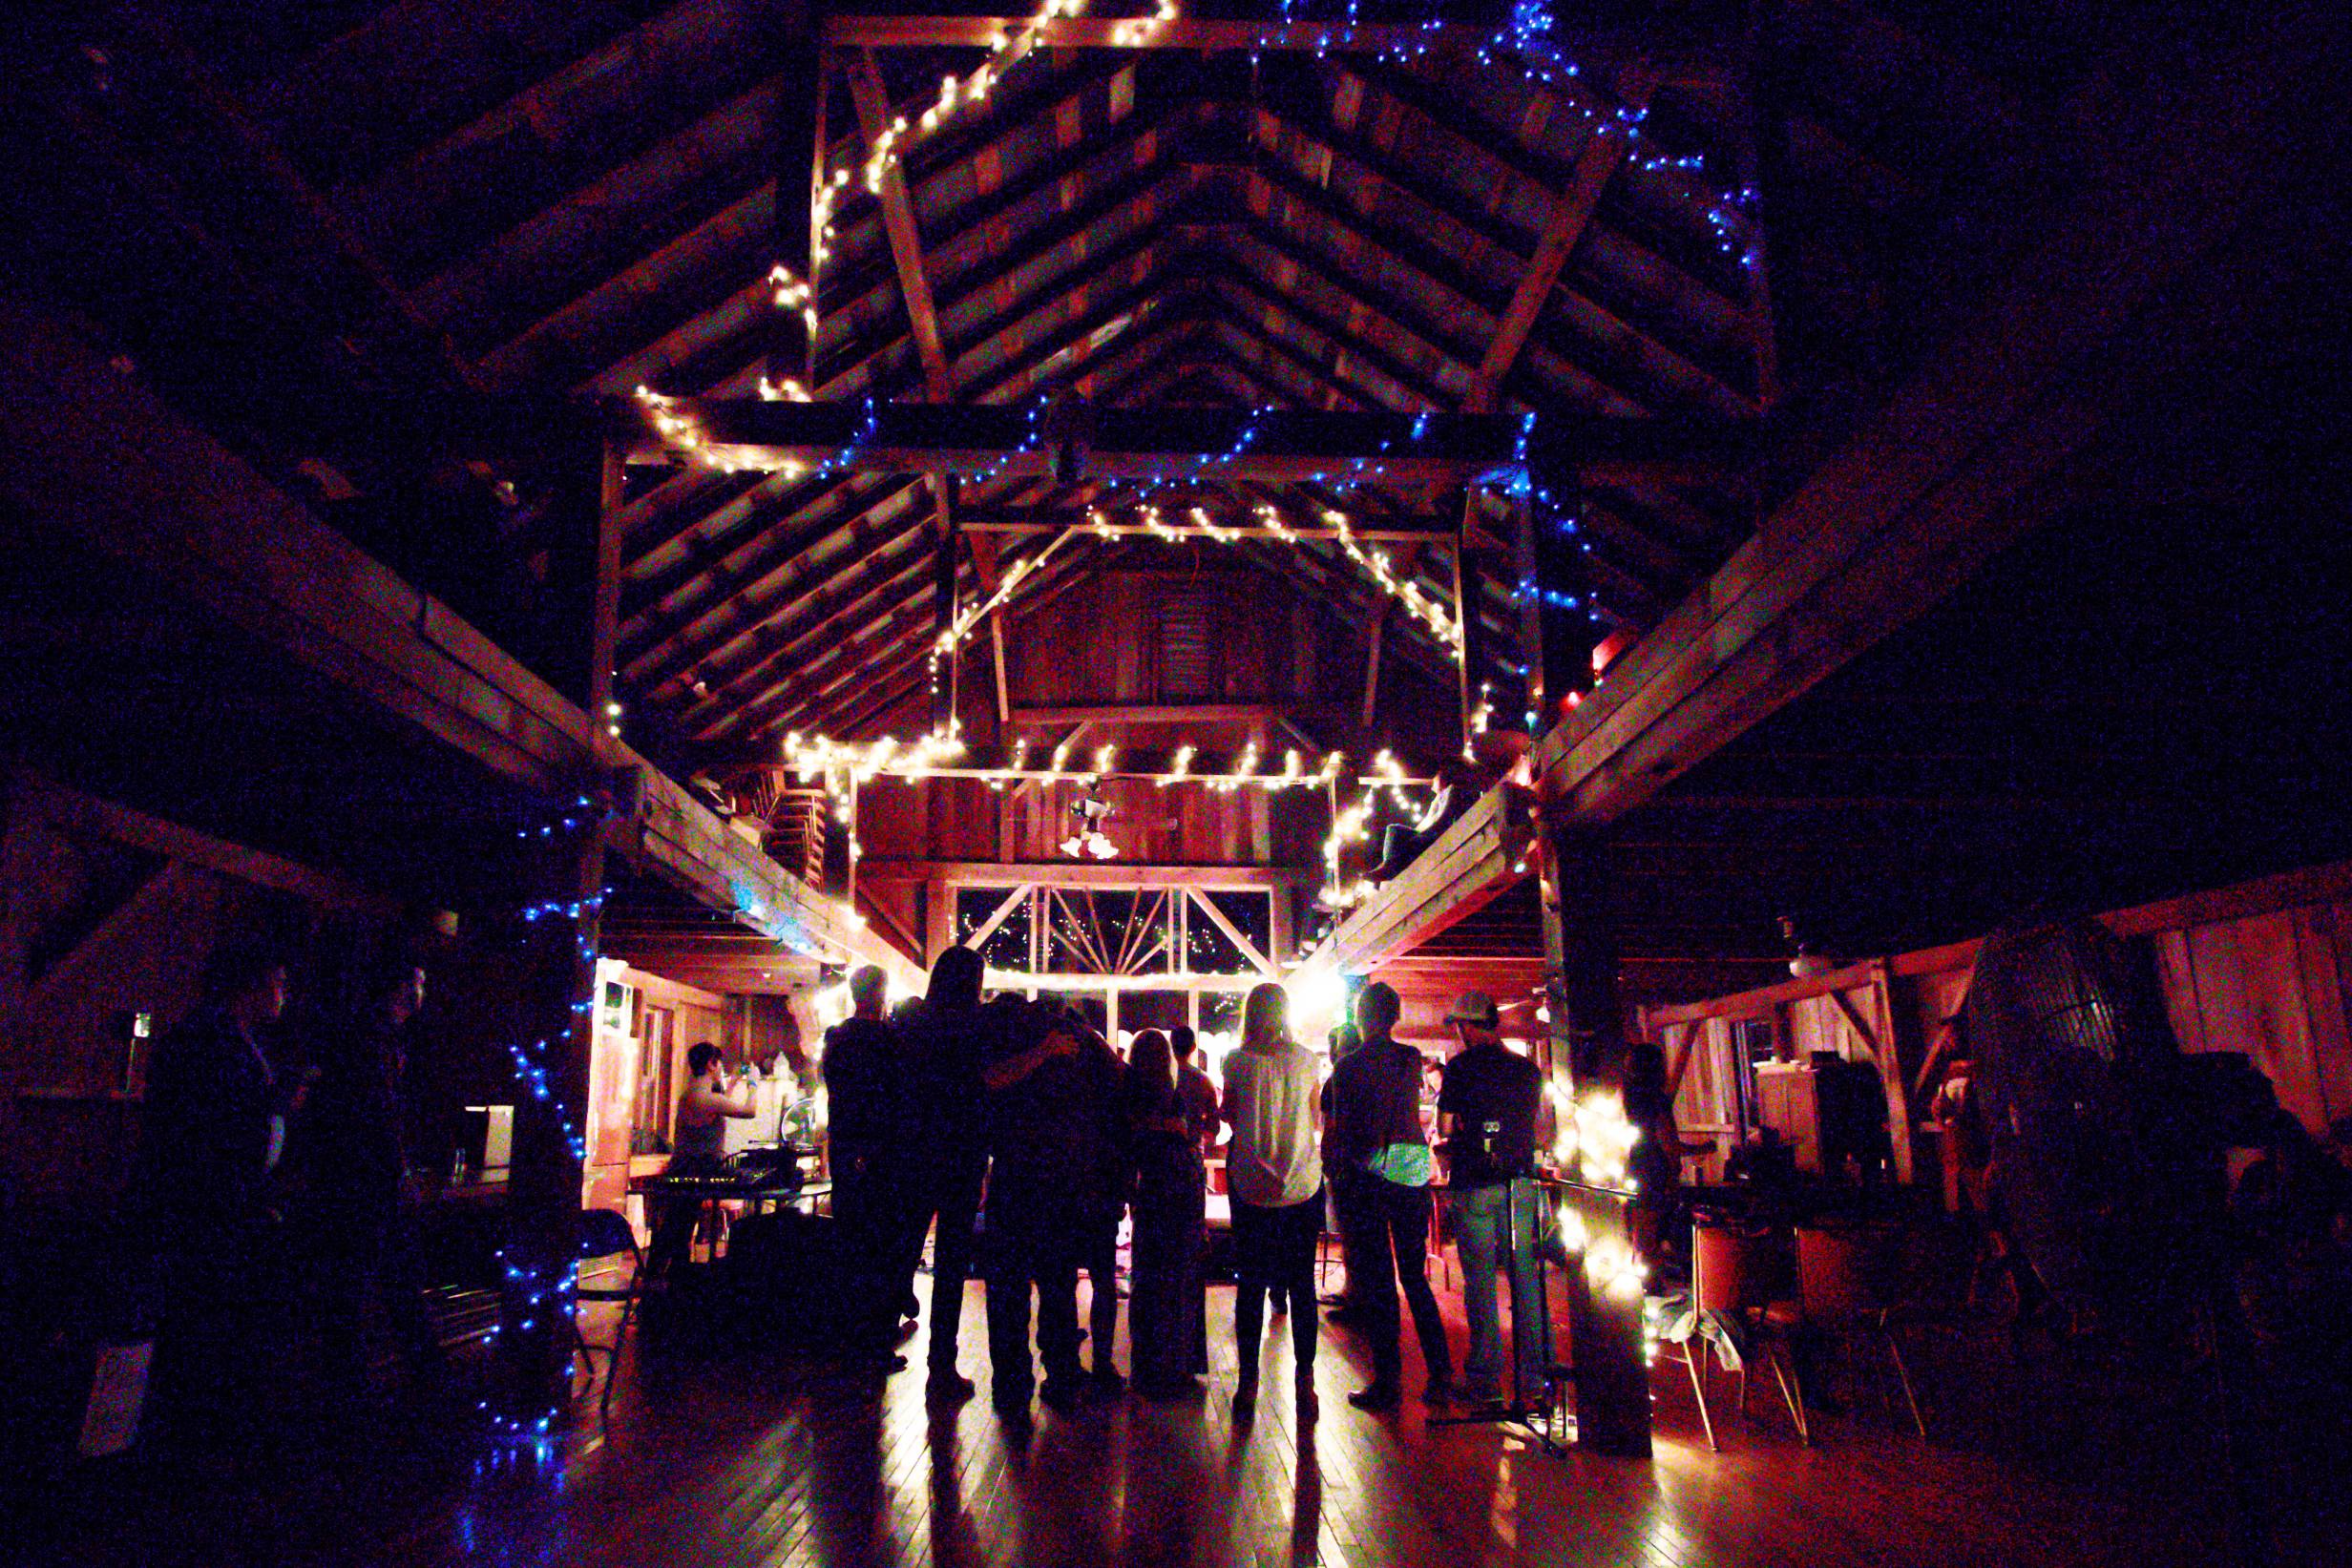 The inside of a barn venue at night during a concert. Lights come from the stage in the background of the image. A crowd is silhouetted in front of the stage.